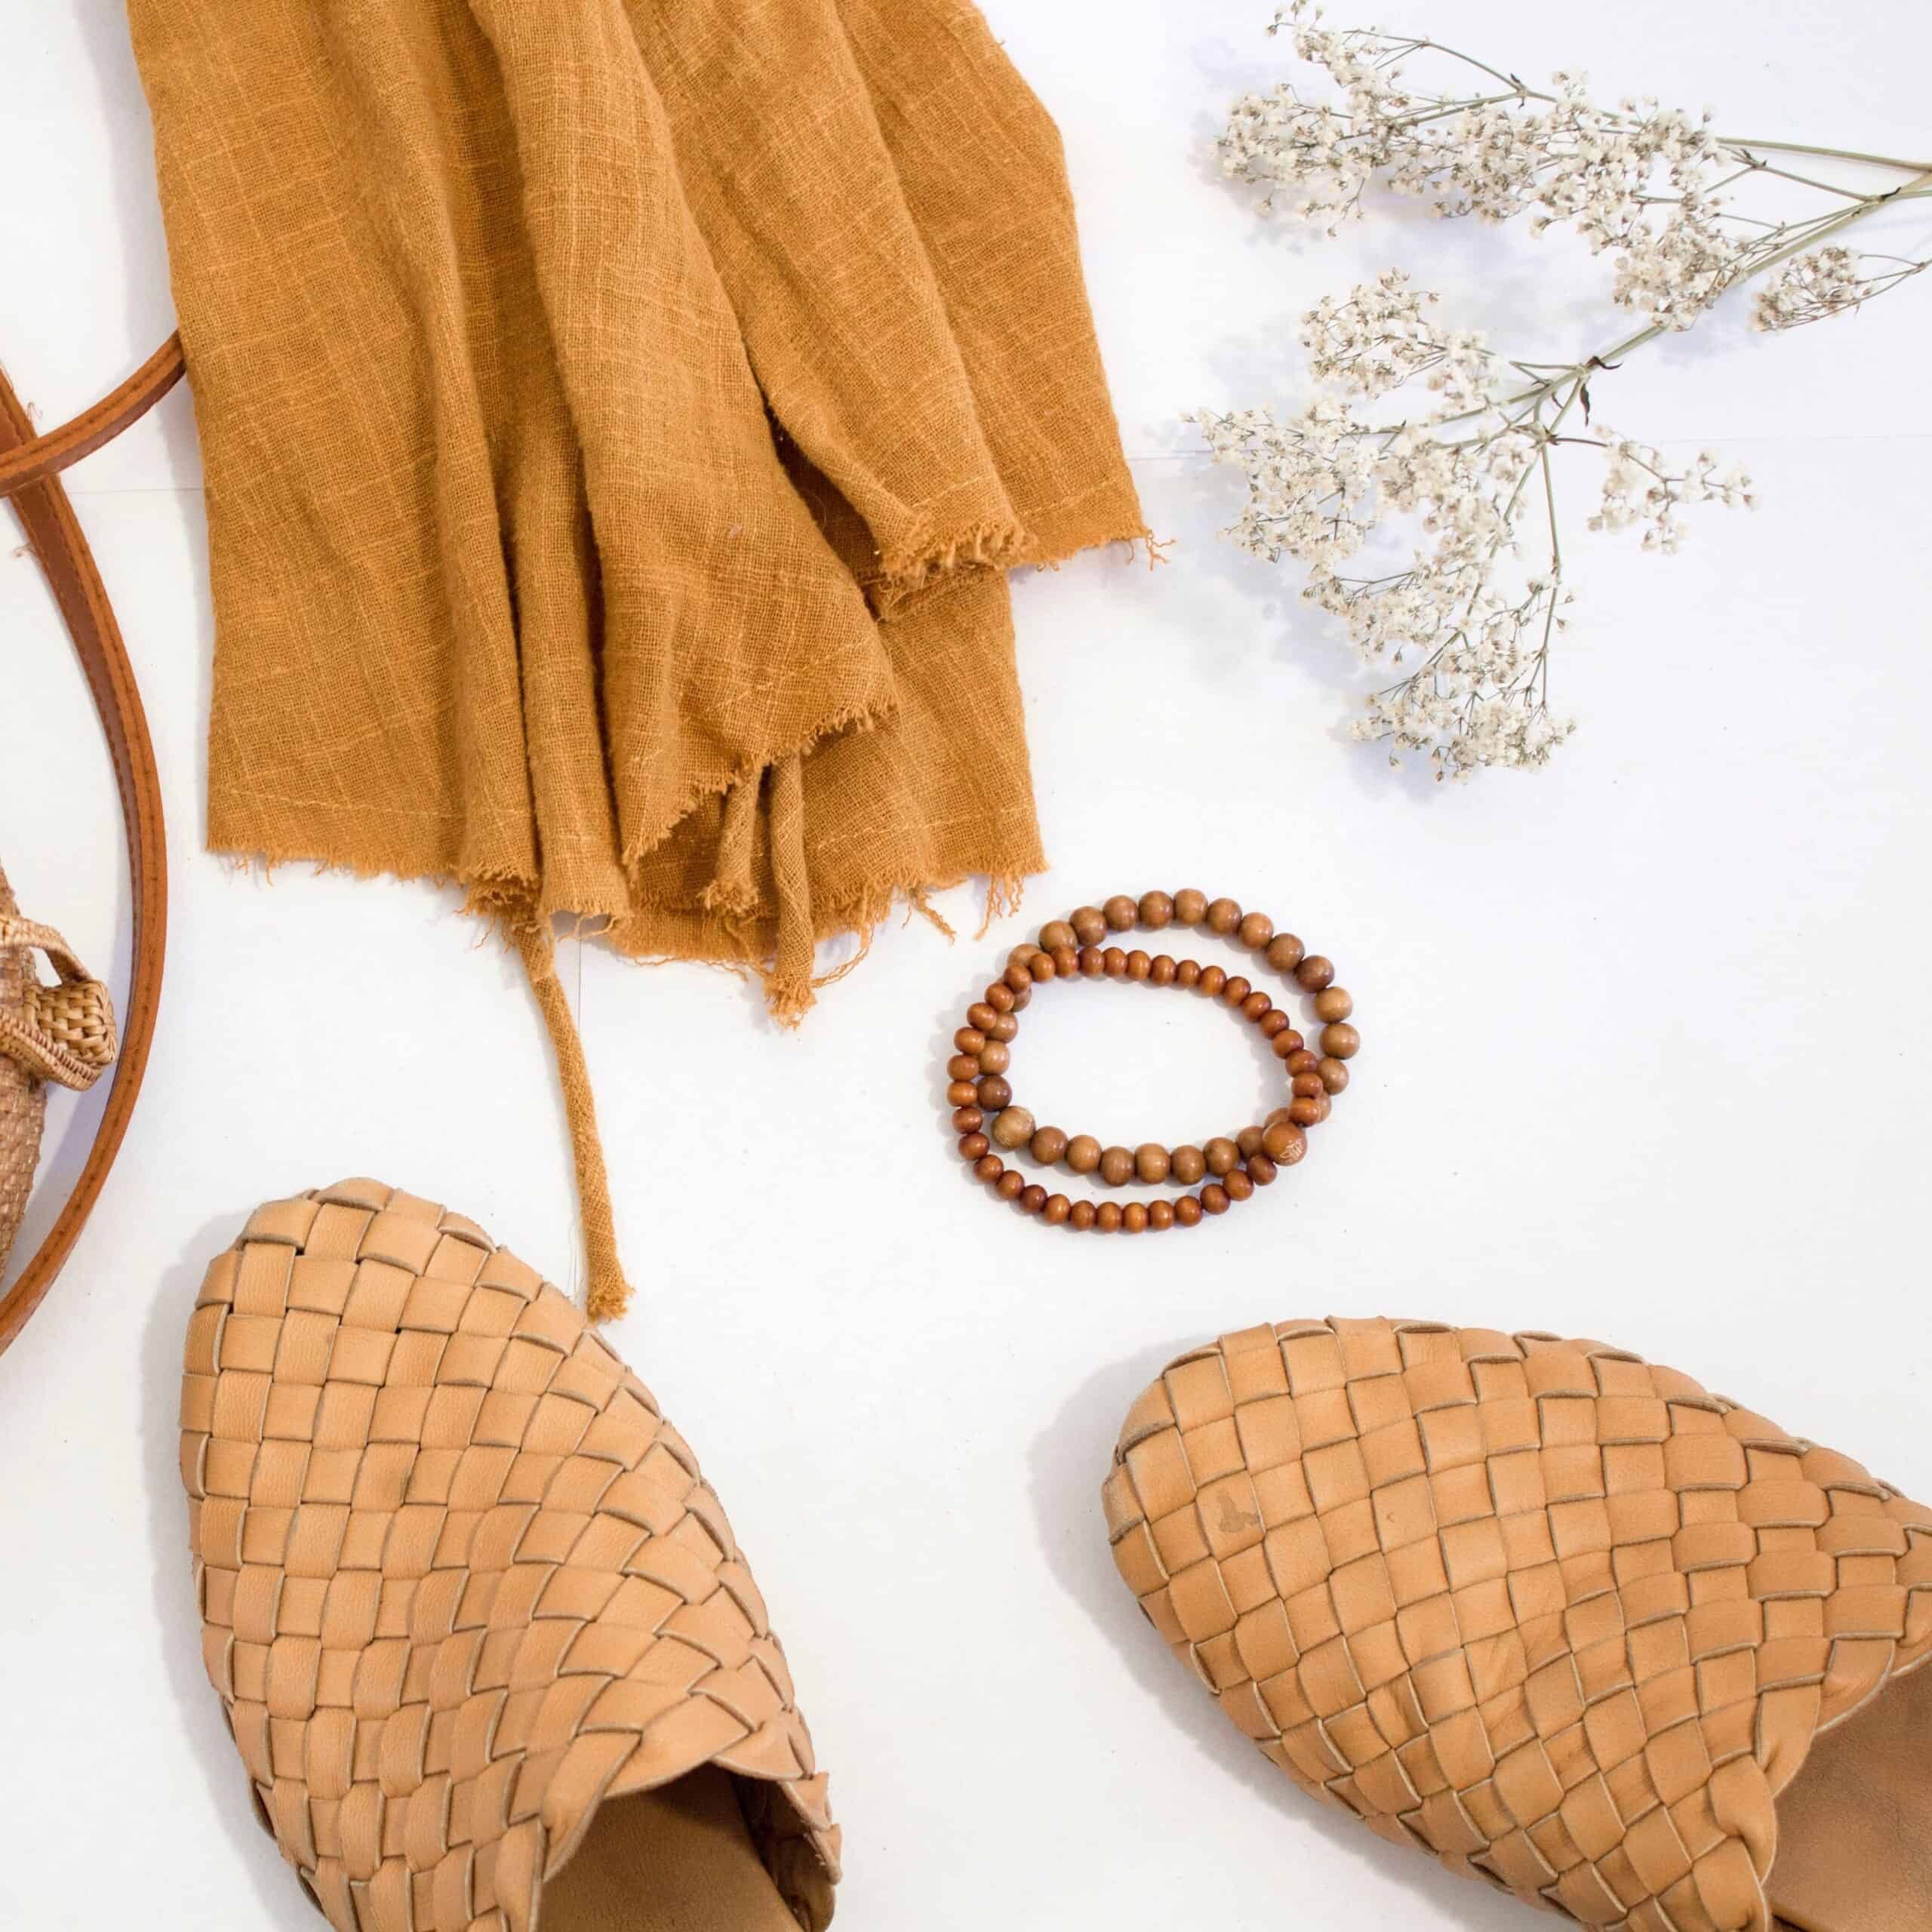 What Shoes To Wear With Linen Pants: 7 Amazing Ideas